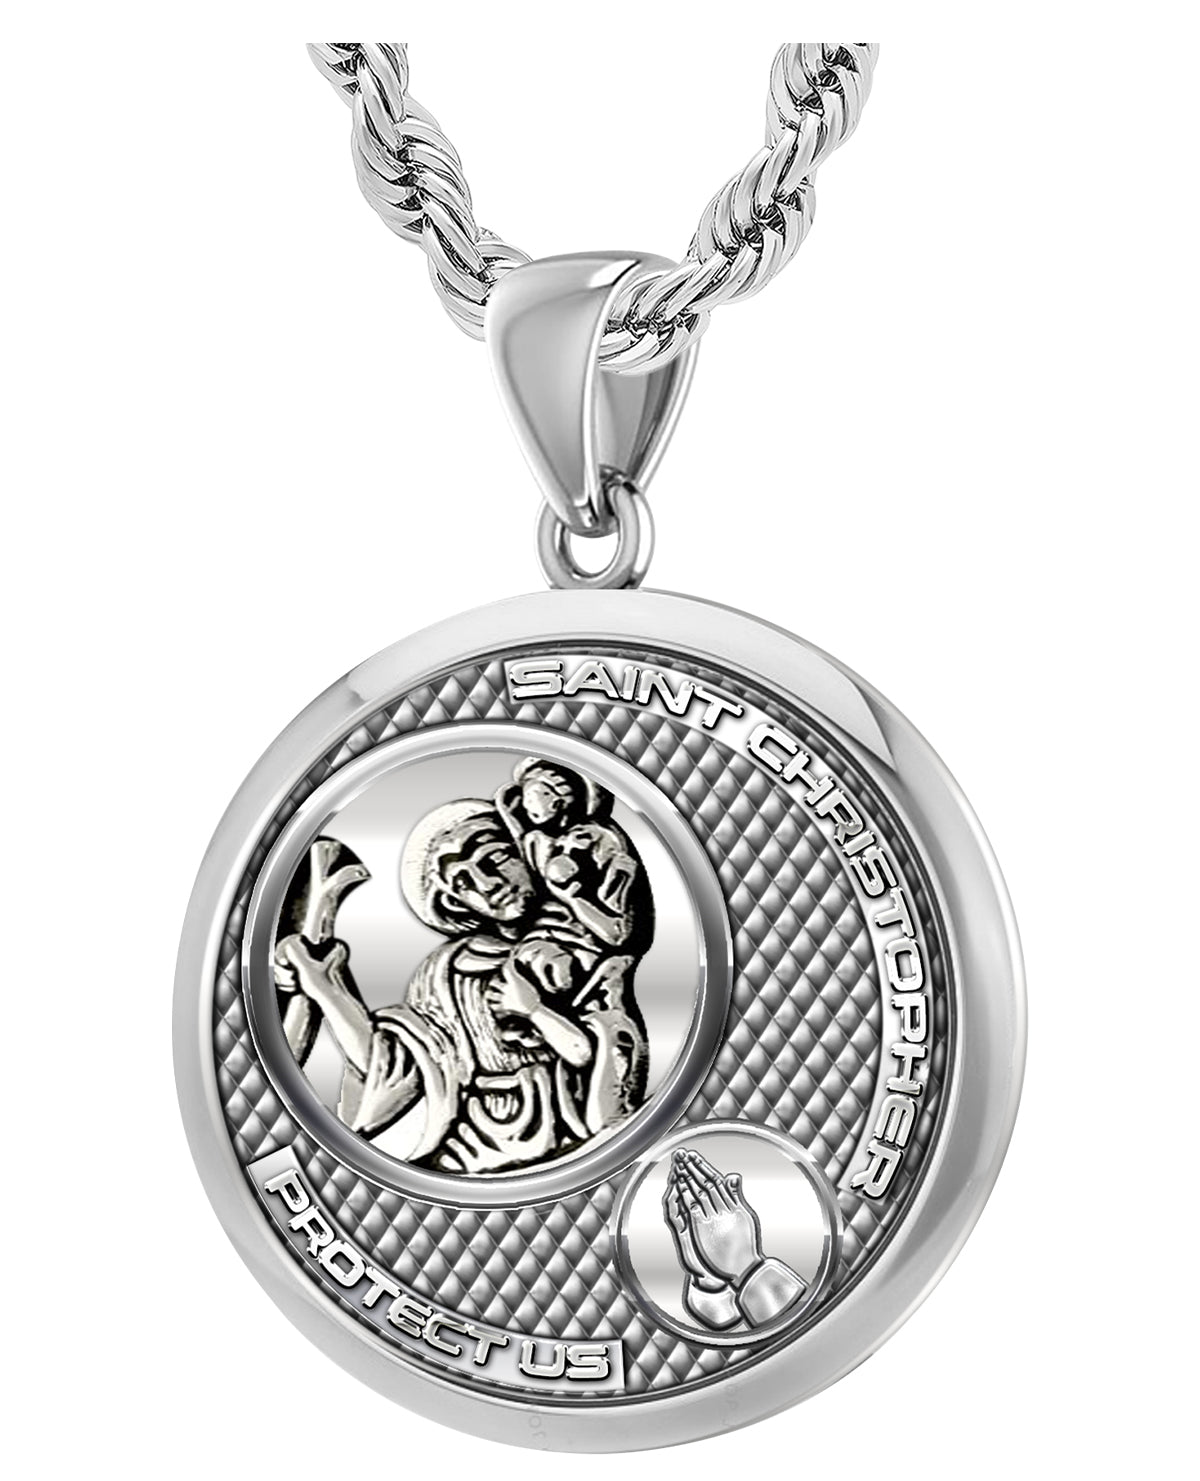 Men's 925 Sterling Silver Round Saint Christopher Round Polished Finish Pendant Necklace, 33mm - US Jewels